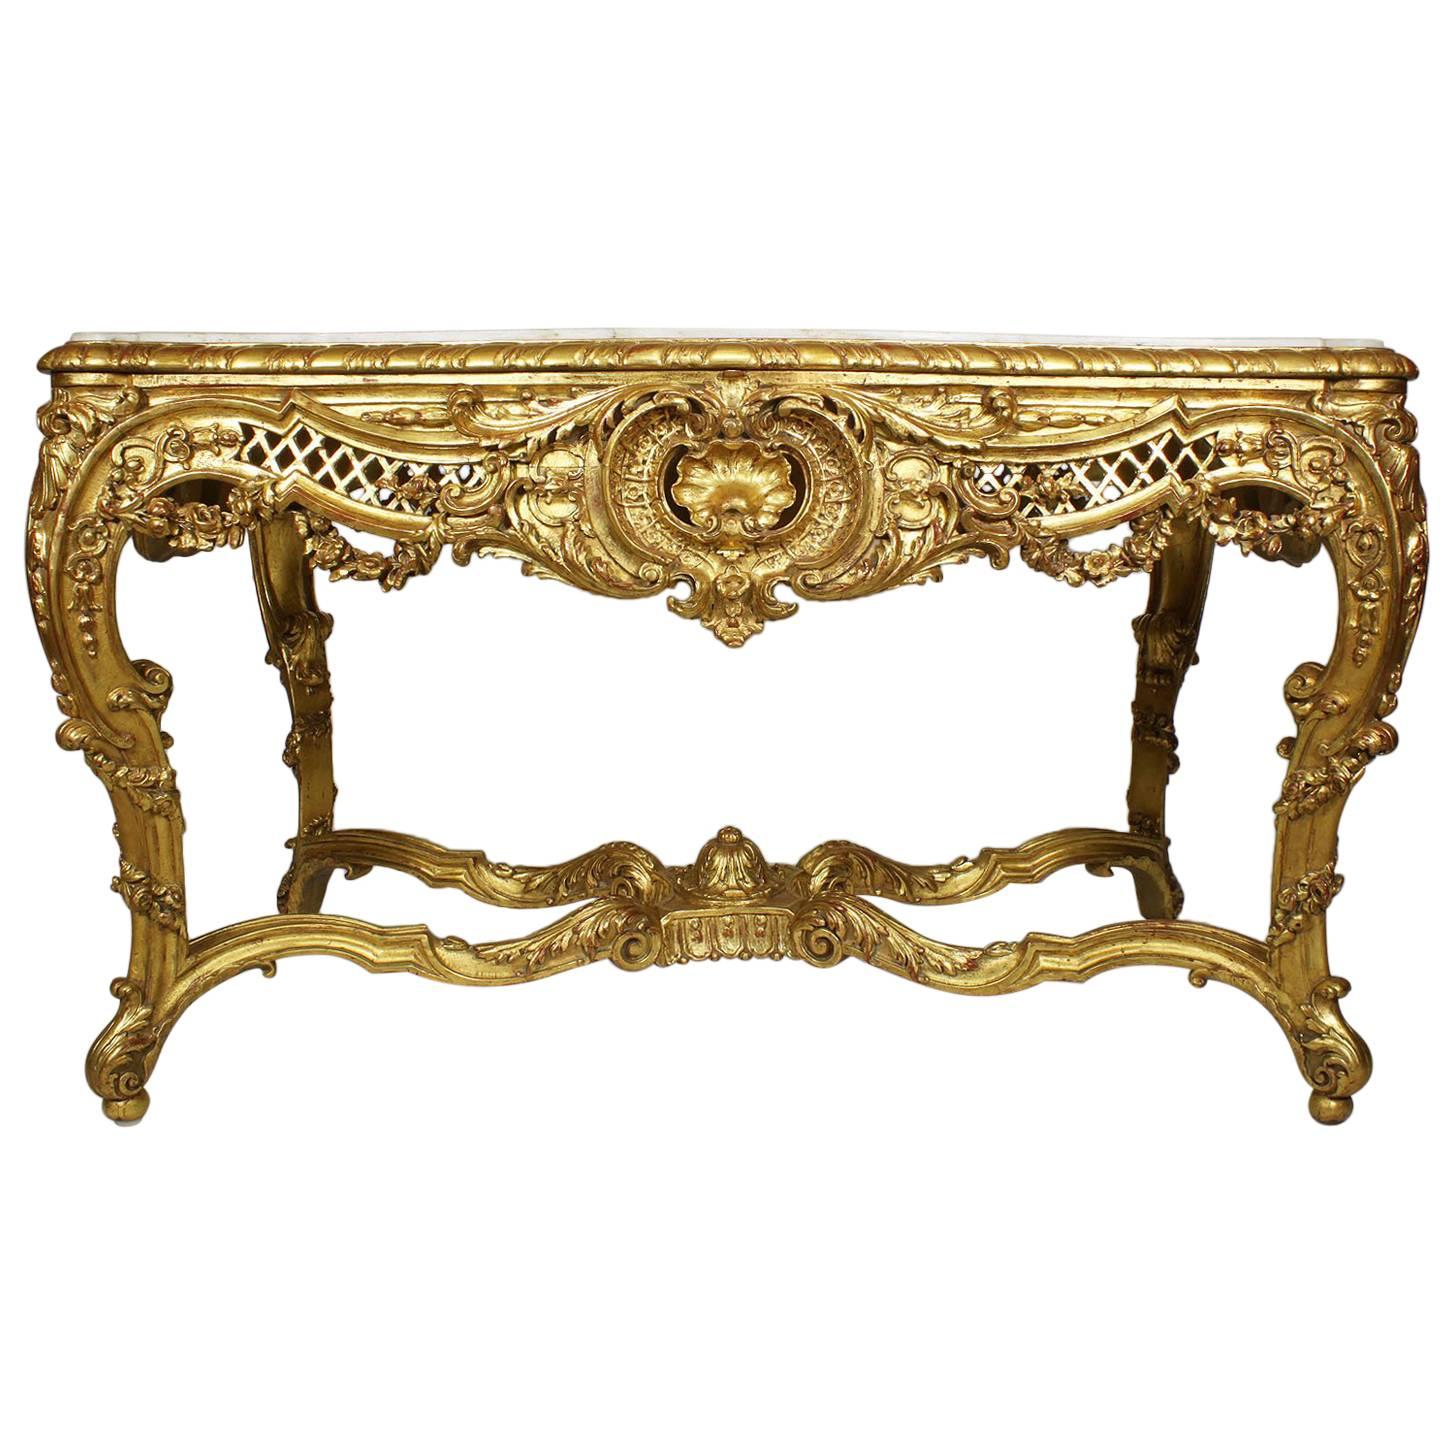 French Belle Époque 19th-20th Century Giltwood Carved Rococo Center Hall Table